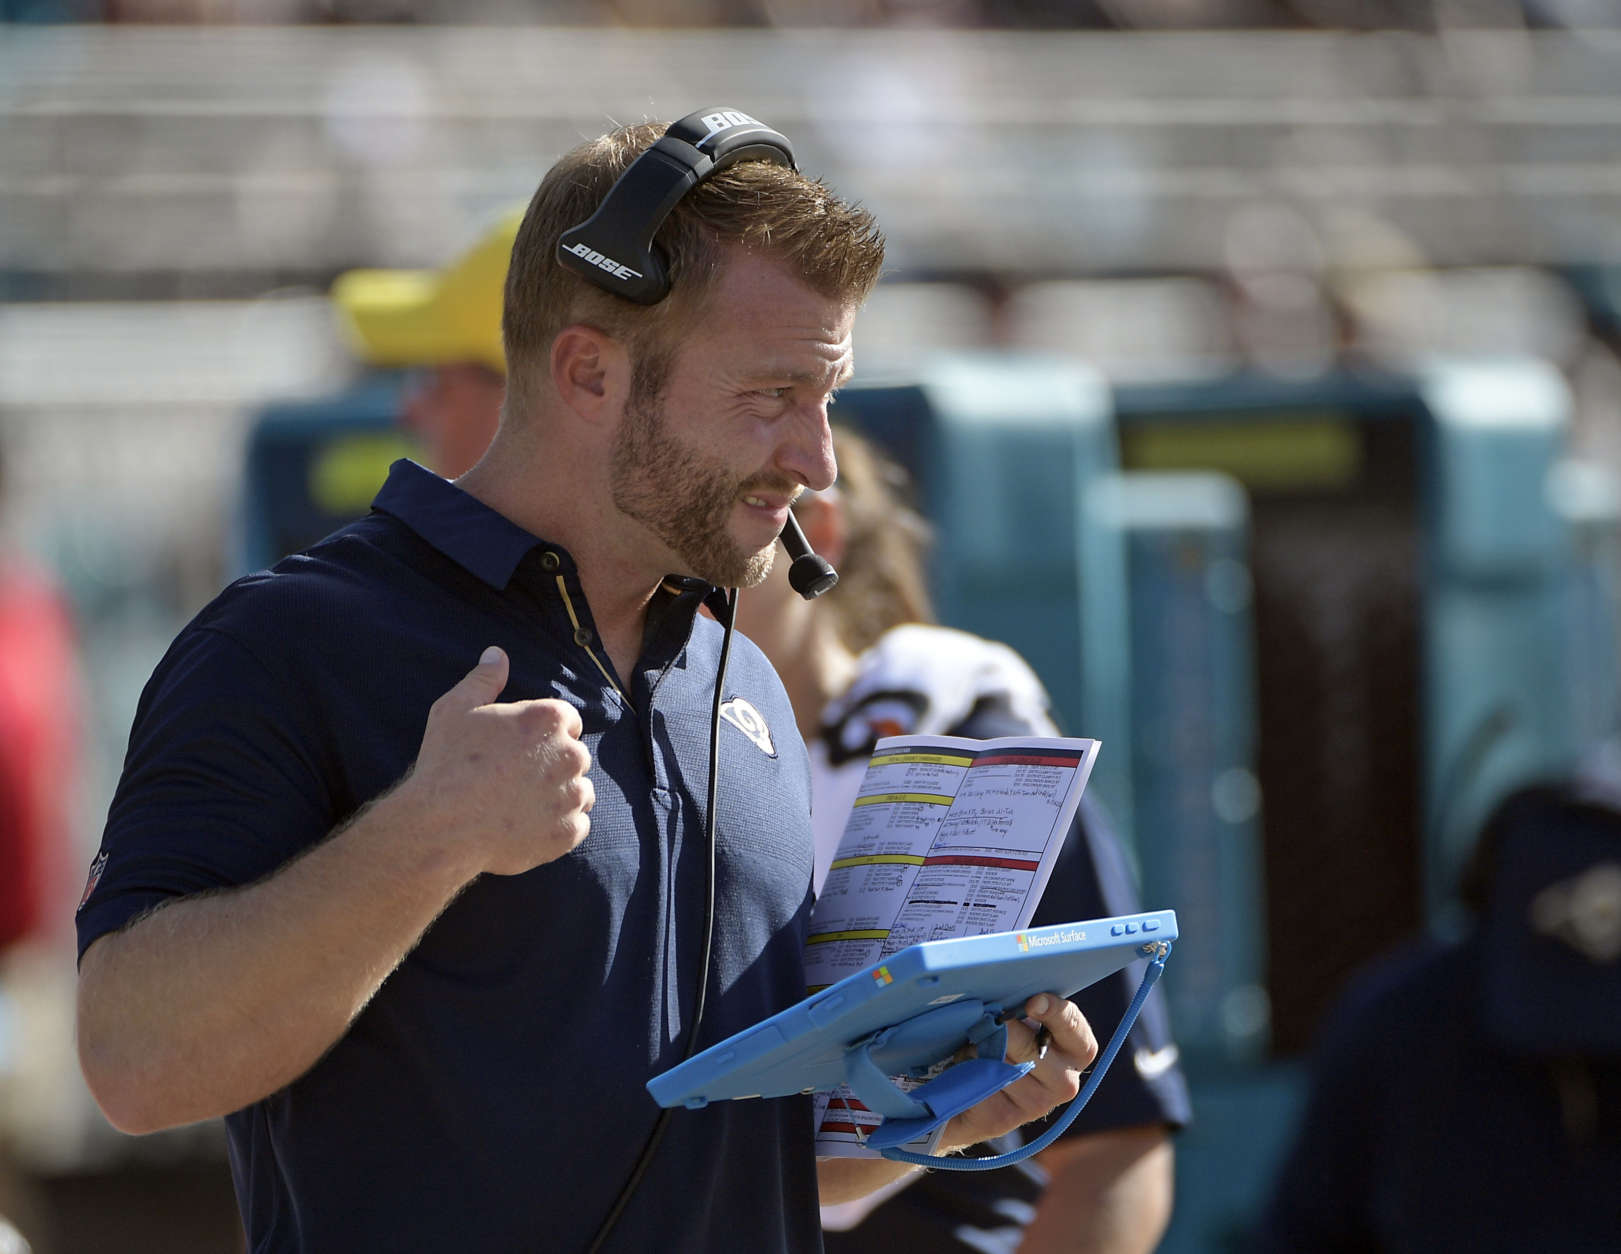 Los Angeles Rams head coach Sean McVay washes his team play against the Jacksonville Jaguars during the first half of an NFL football game, Sunday, Oct. 15, 2017, in Jacksonville, Fla. (AP Photo/Phelan M. Ebenhack)